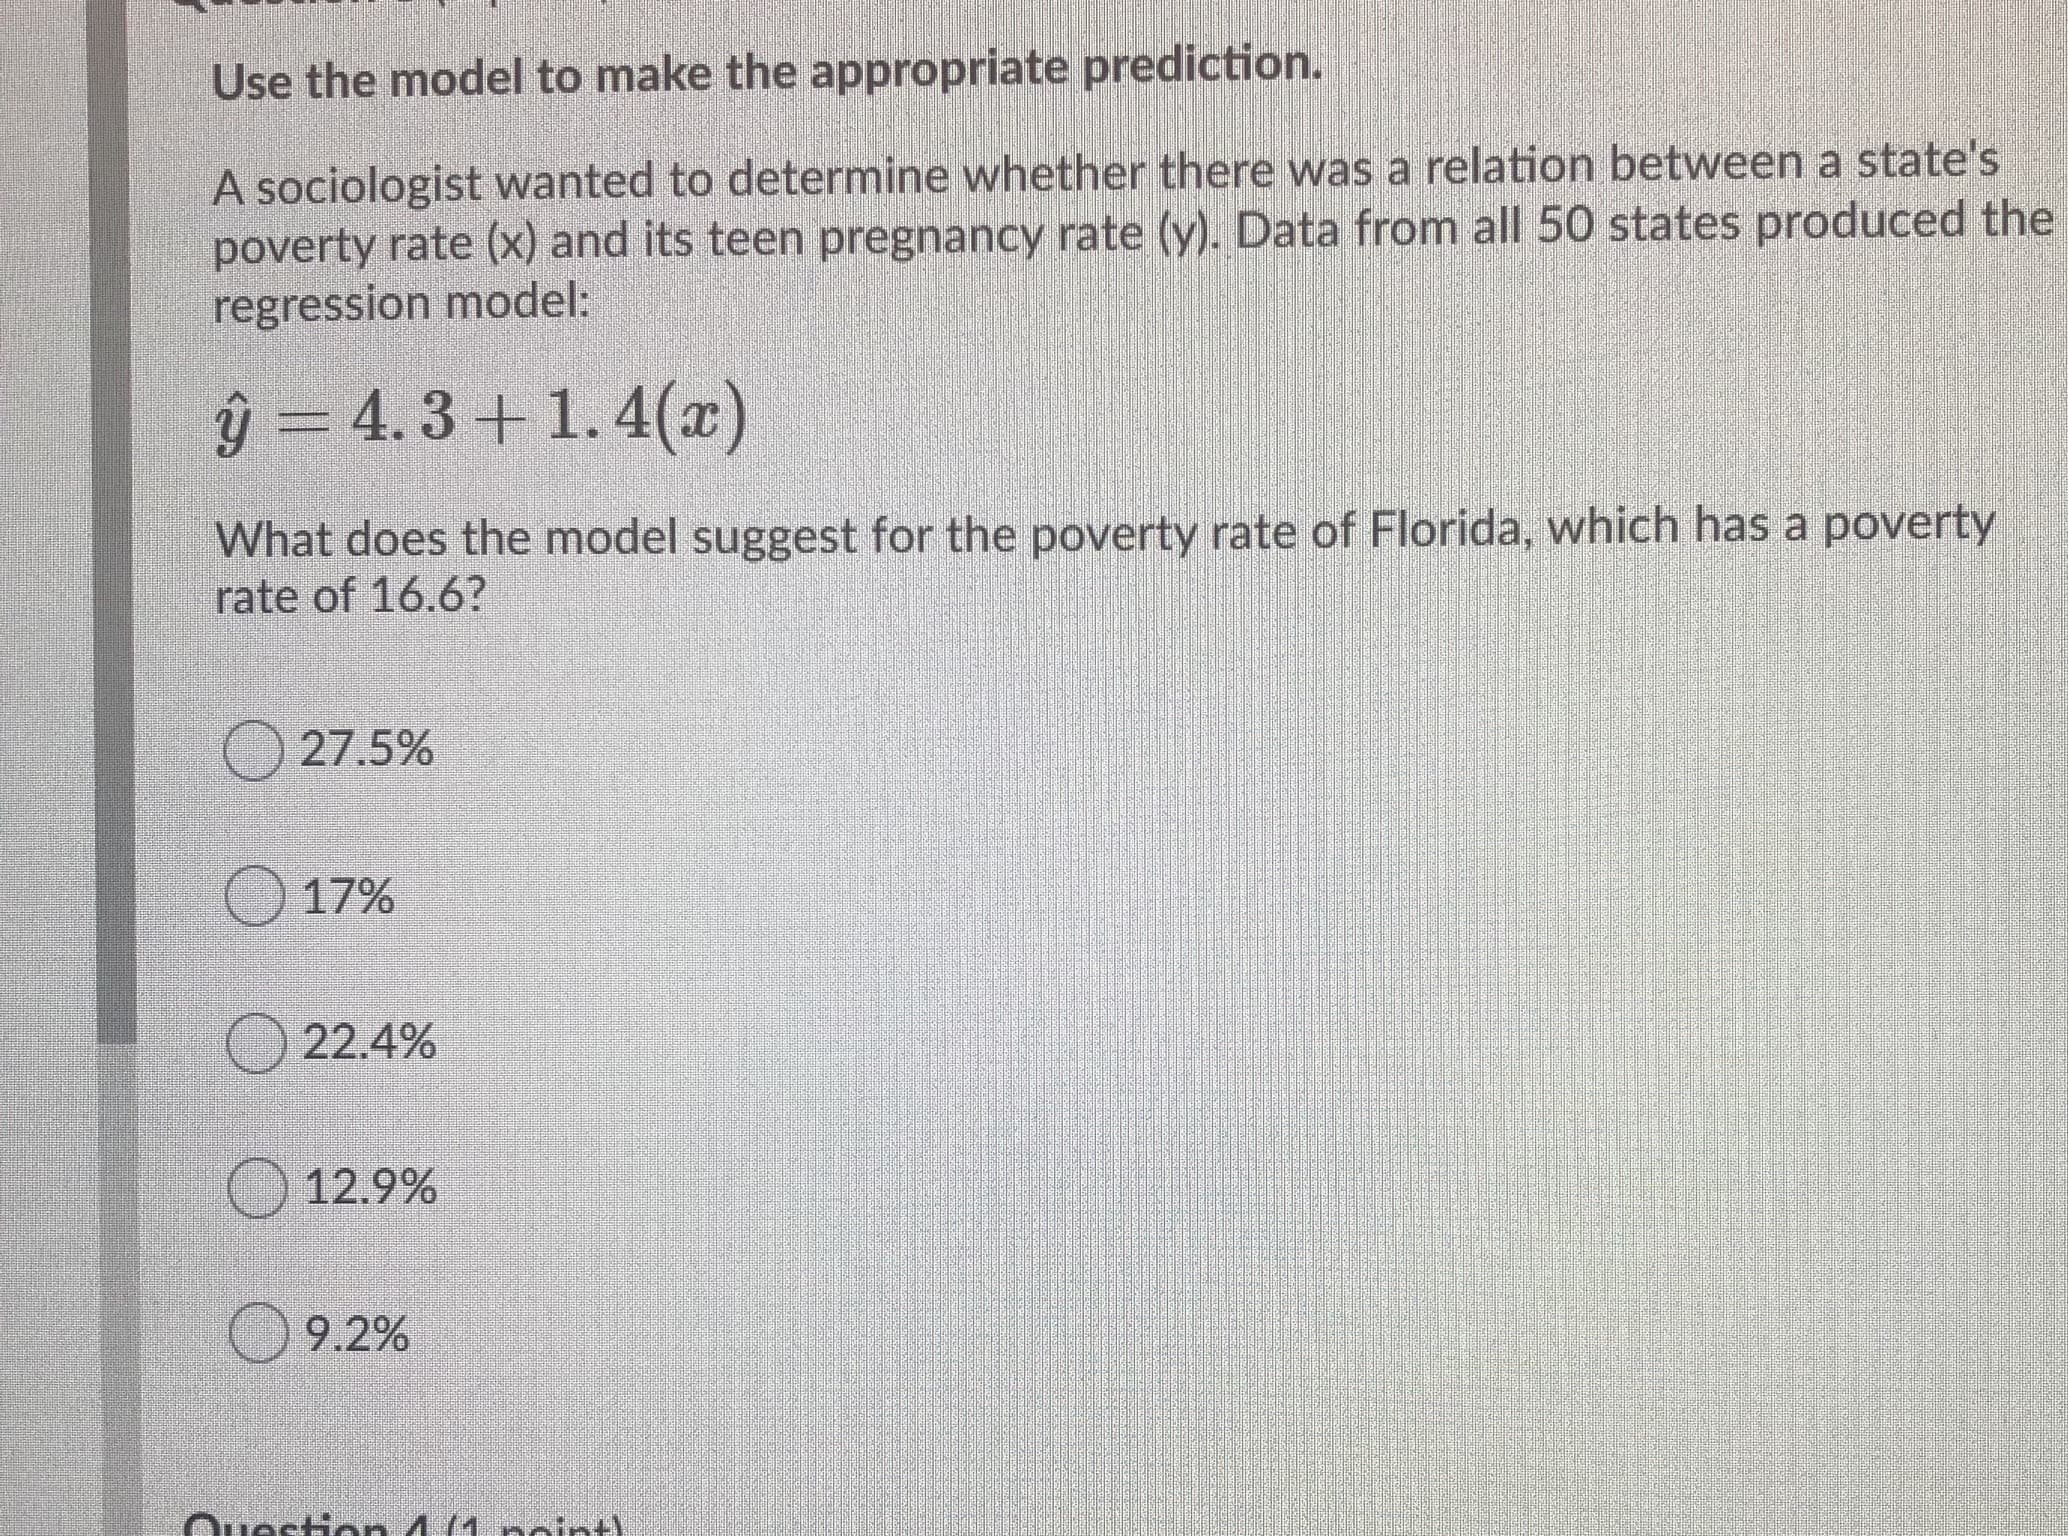 Use the model to make the appropriate prediction.
A sociologist wanted to determine whether there was a relation between a state's
poverty rate (x) and its teen pregnancy rate (y). Data from all 50 states produced the
regression model:
ý = 4.3 + 1. 4(x)
What does the model suggest for the poverty rate of Florida, which has a poverty
rate of 16.6?
27.5%
17%
22.4%
O 12.9%
9.2%
Ouestion 4 (1. noint)
